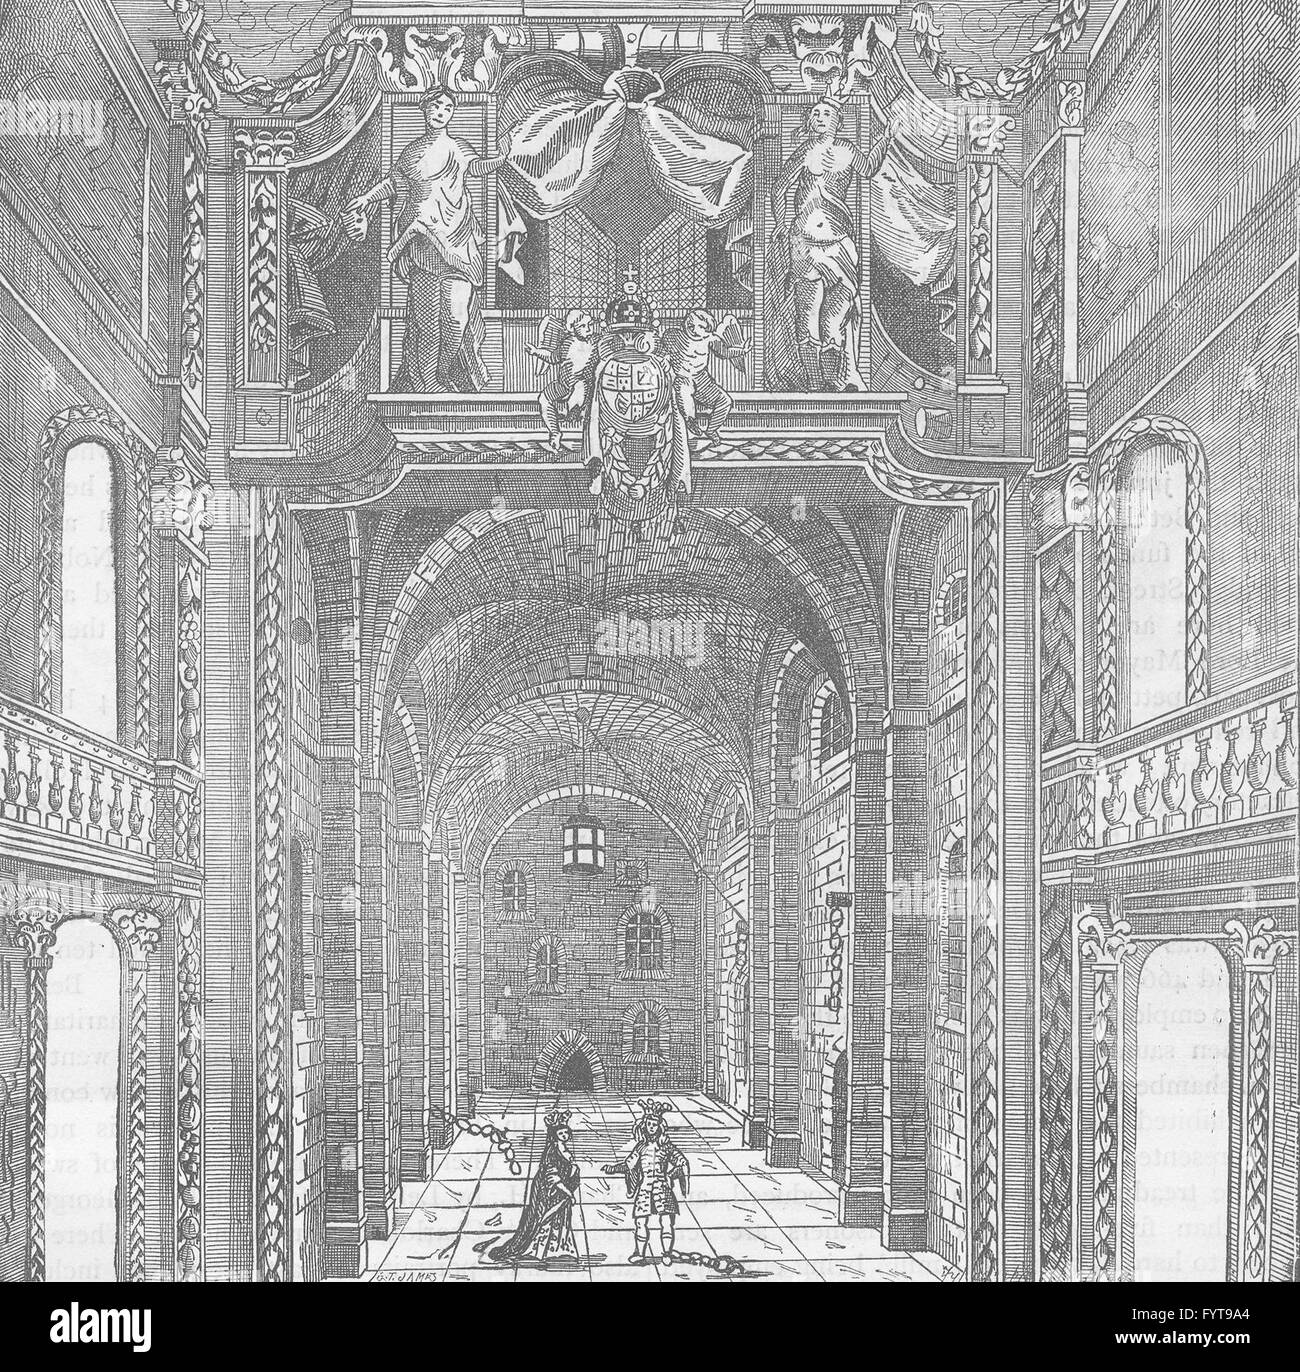 WHITEFRIARS: Duke's Theatre, from Settle's 'Empress of Morocco'. Interior, c1880 Stock Photo